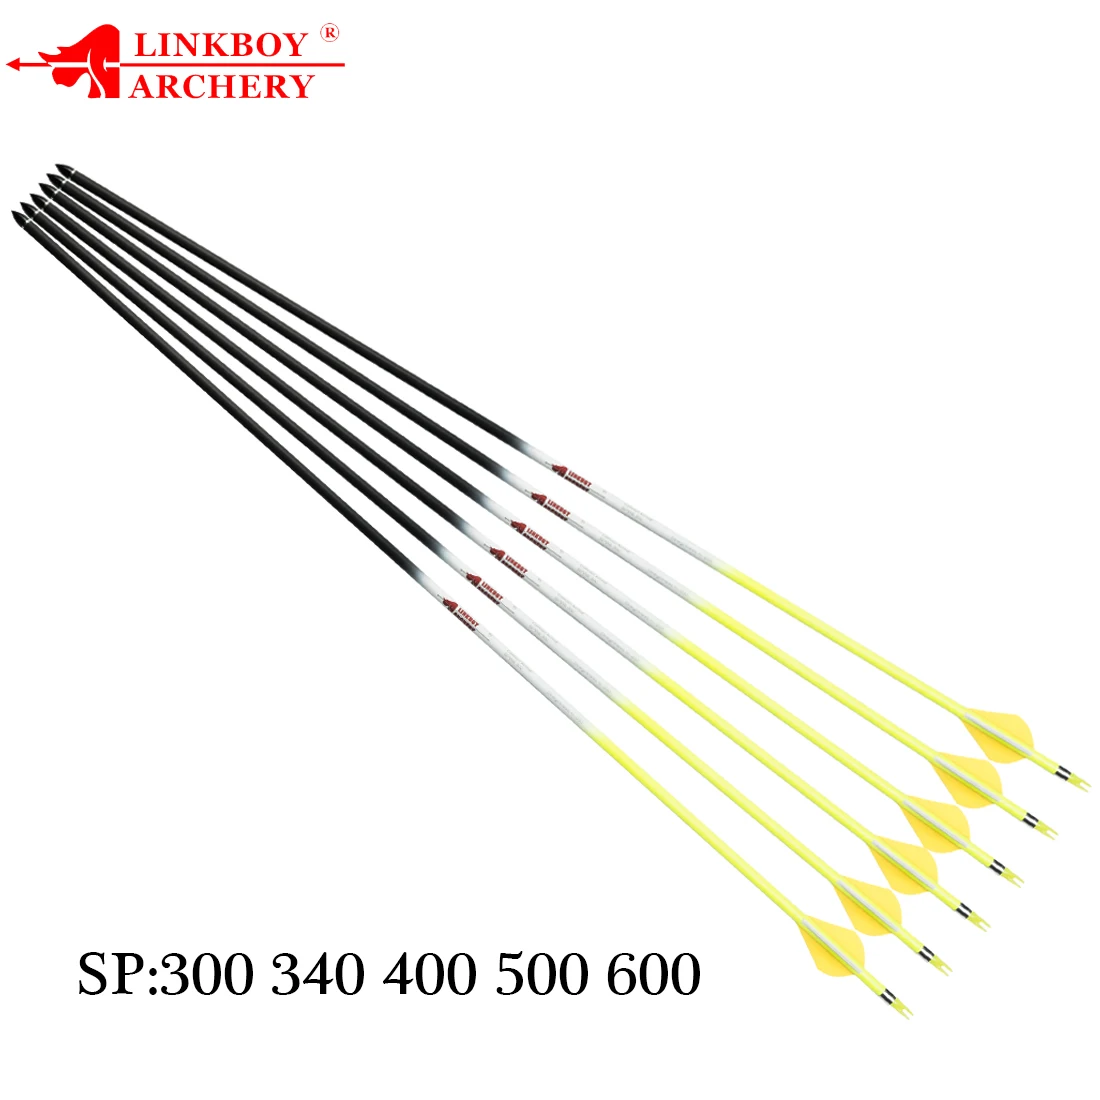 12pcs Linkboy Archery 100% Carbon Arrows ID6.2MM Spine 340 2inch Plastic Vanes 75gr Tips Compound Traditional Bow Shooting